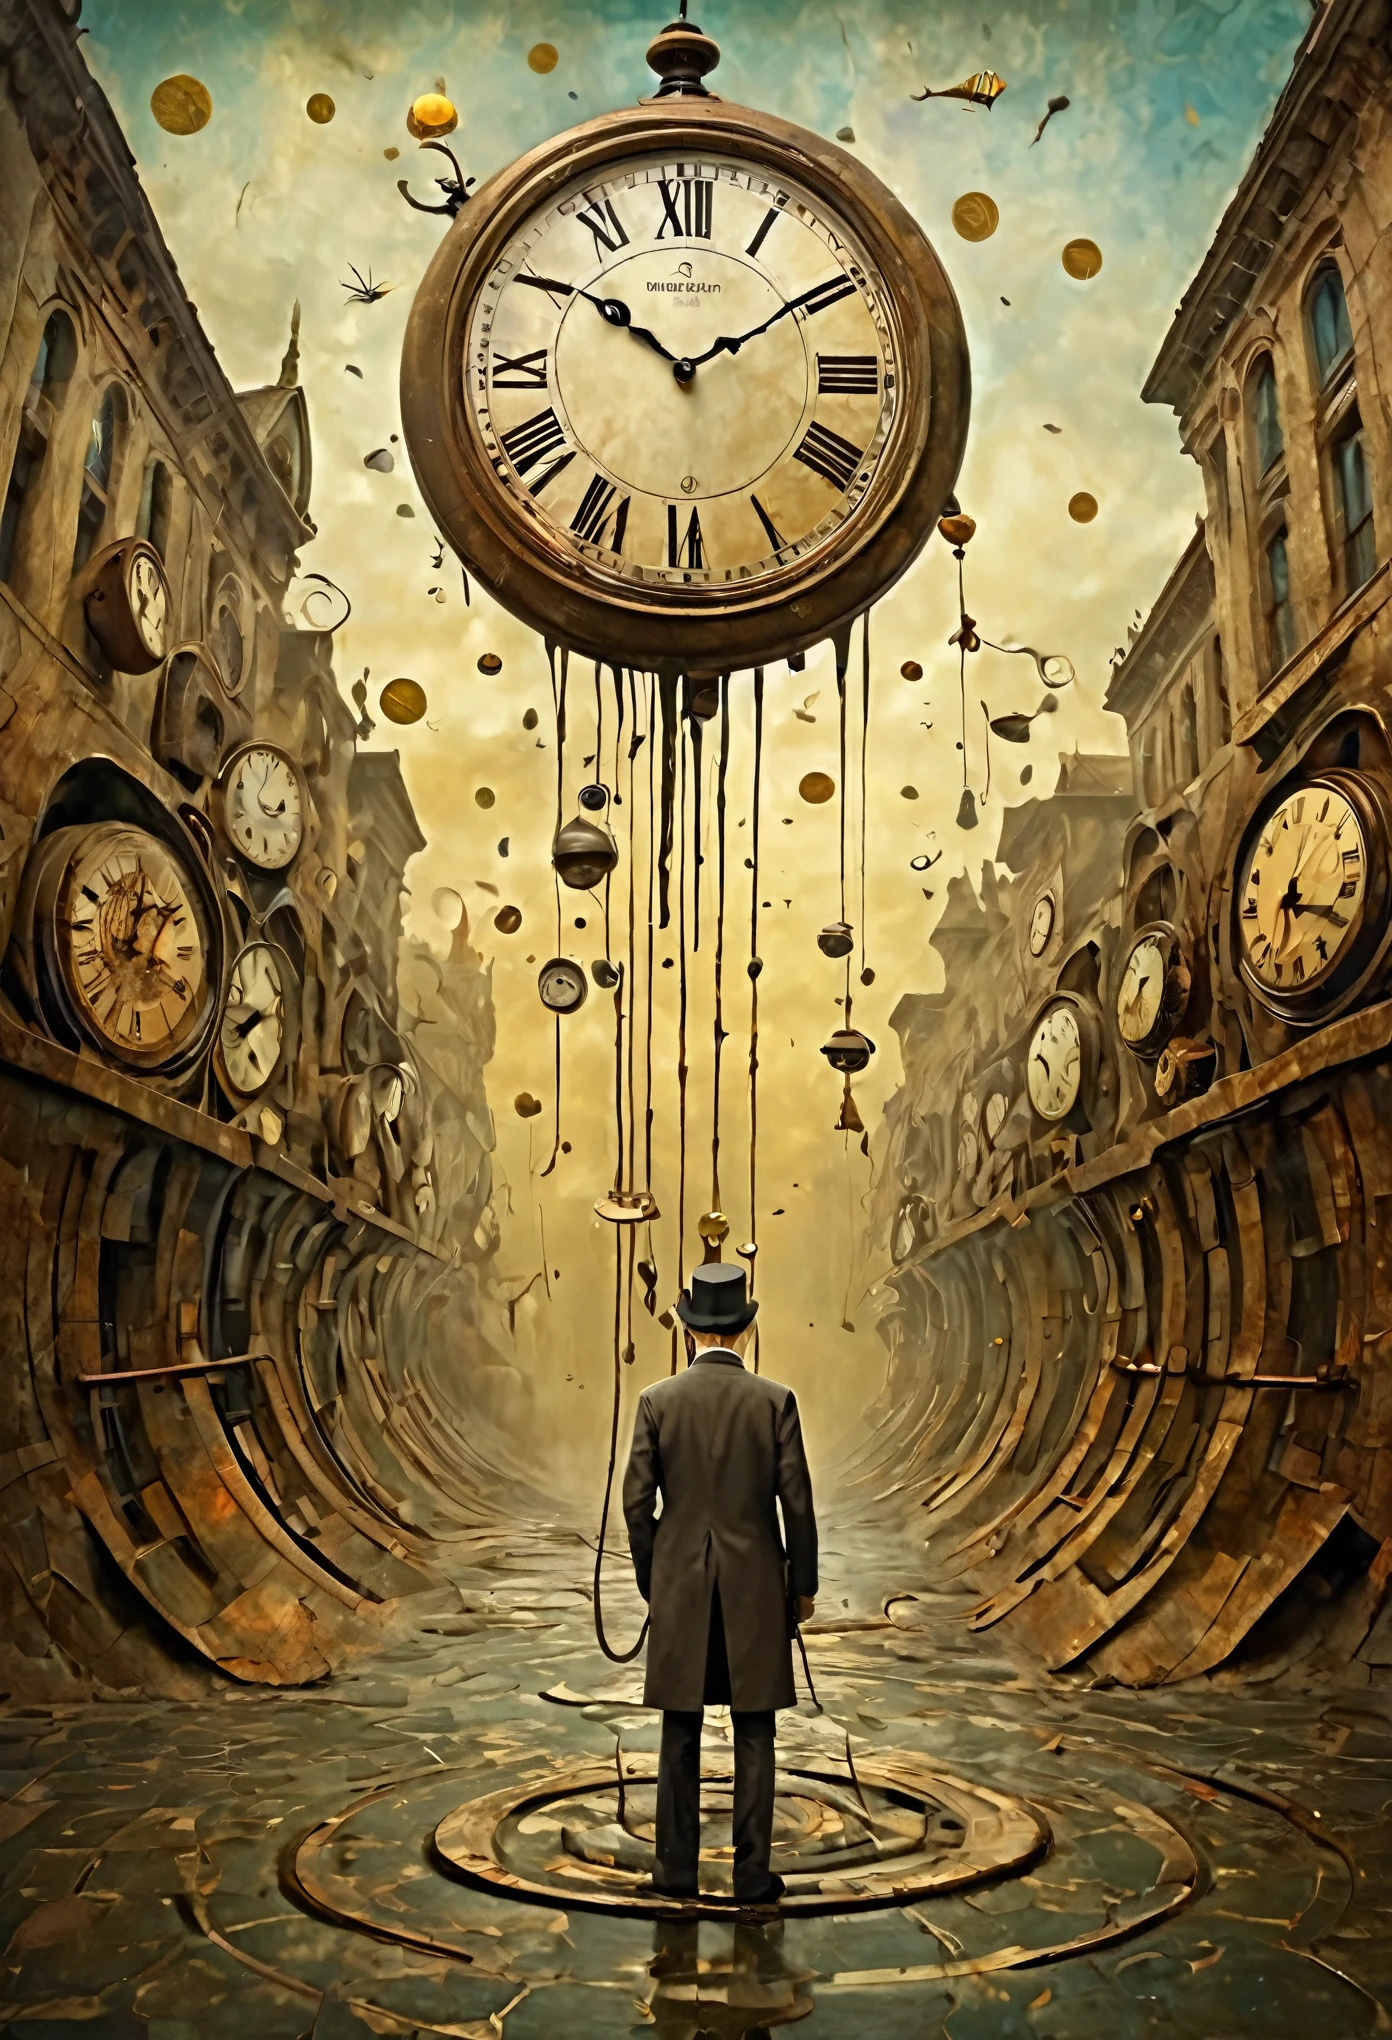 Neo Surrealism, by Gabriel Pacheco and Max Ernst, magical realism bizarre art, pop surrealism,a surreal scene of clocks melting and bending in a time-travel mishap, with a person caught in the distortion, whimsical art. 